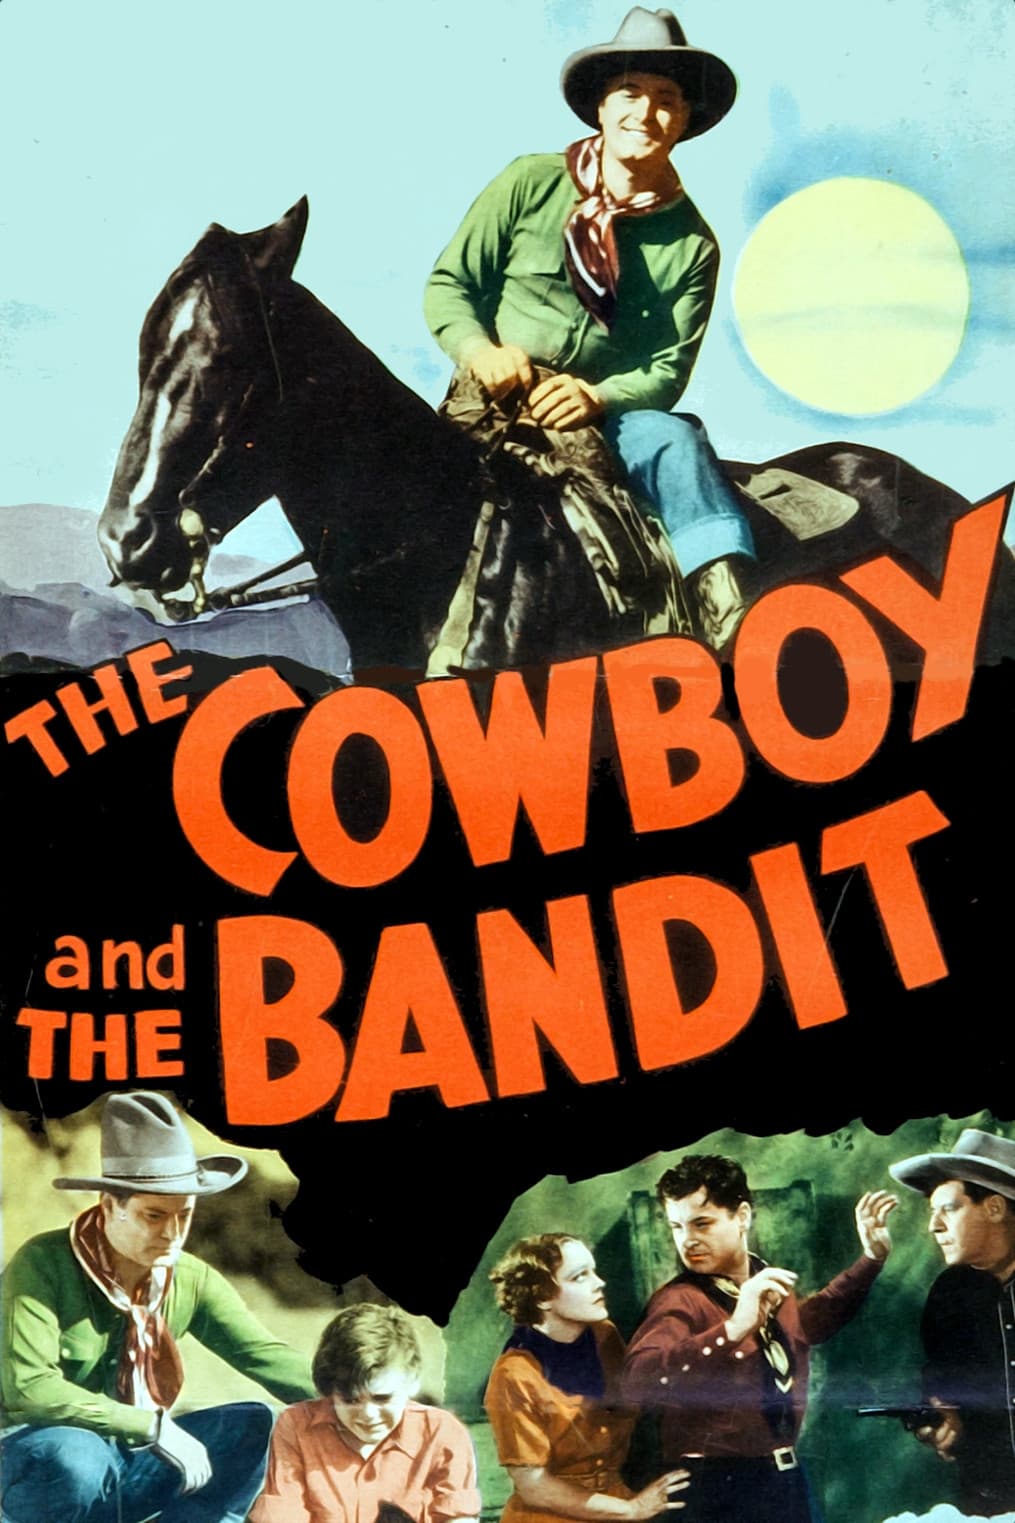 The Cowboy and the Bandit (1935)